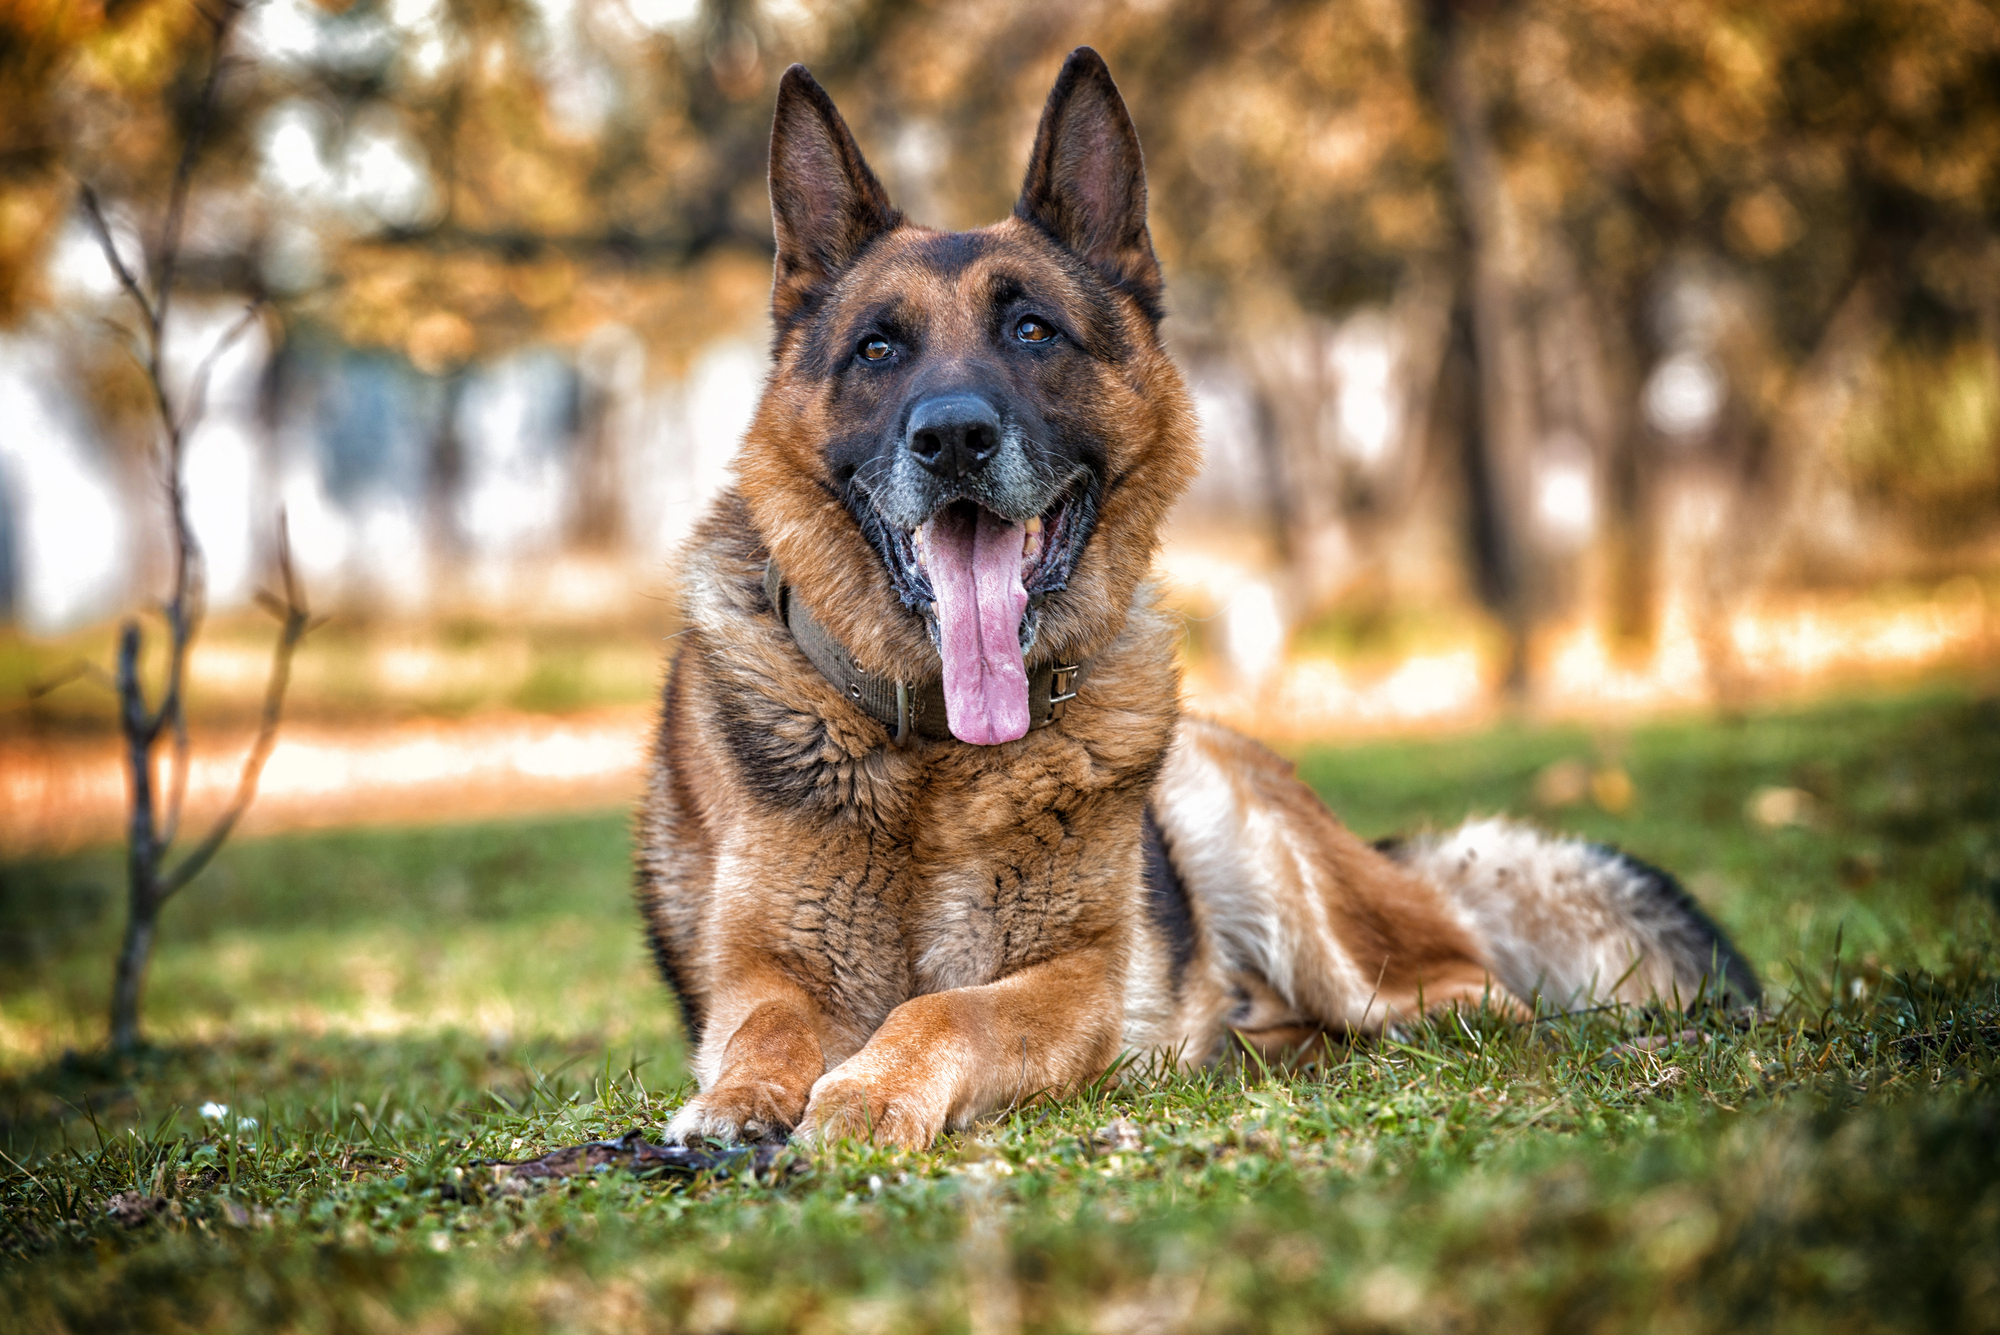 Relaxed protection dog, a German Shepherd, lounging on the grass in a park, tongue out in a serene setting